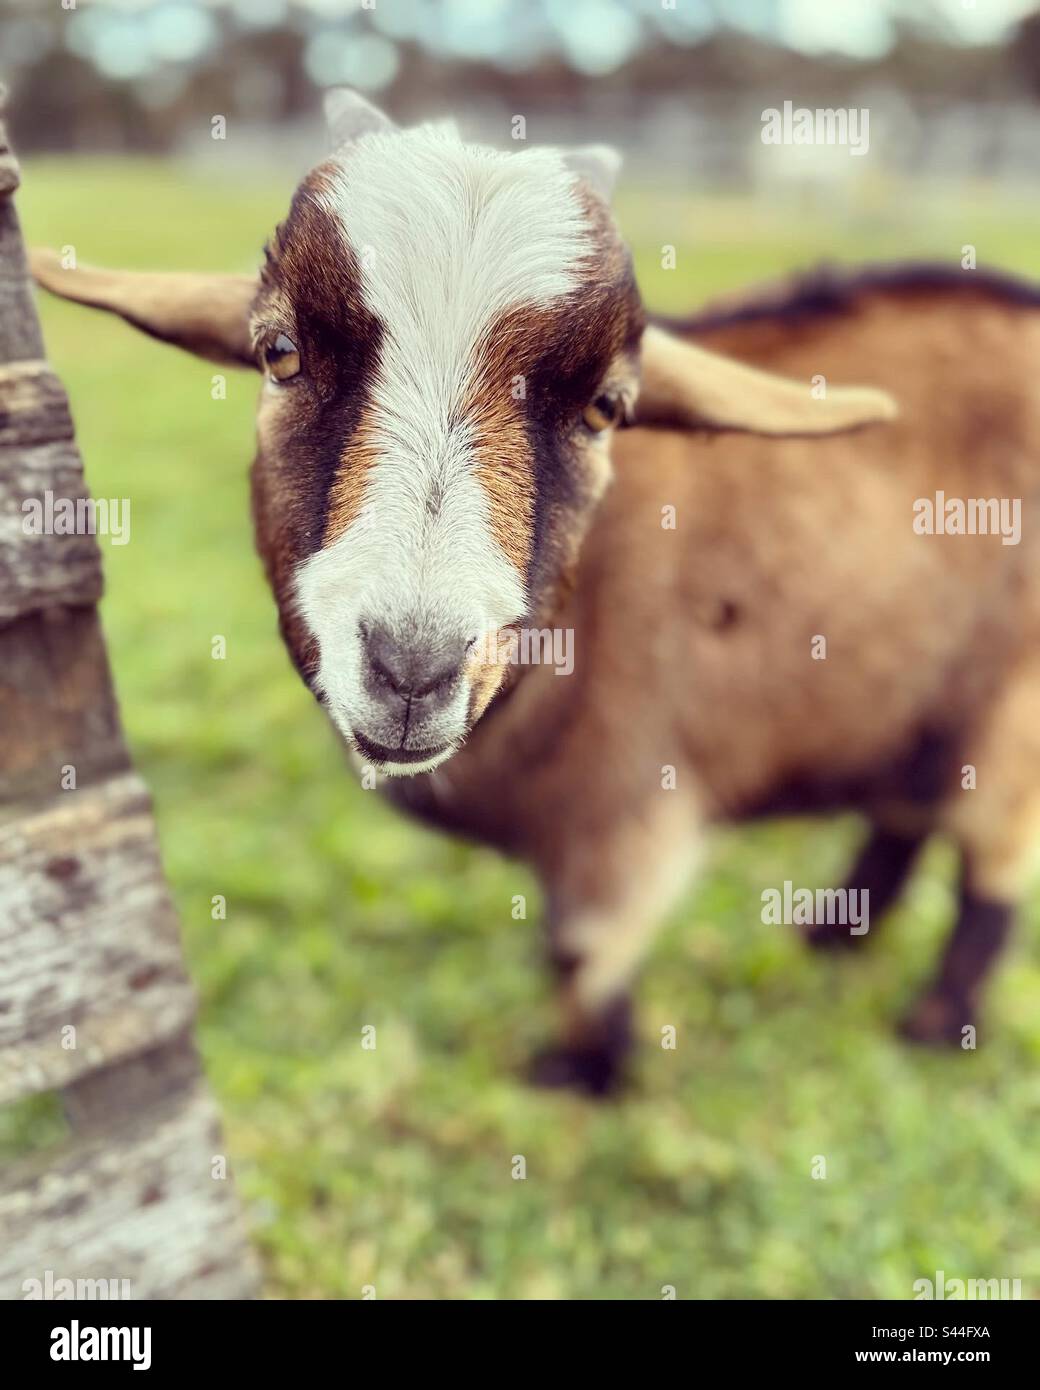 A goat Stock Photo